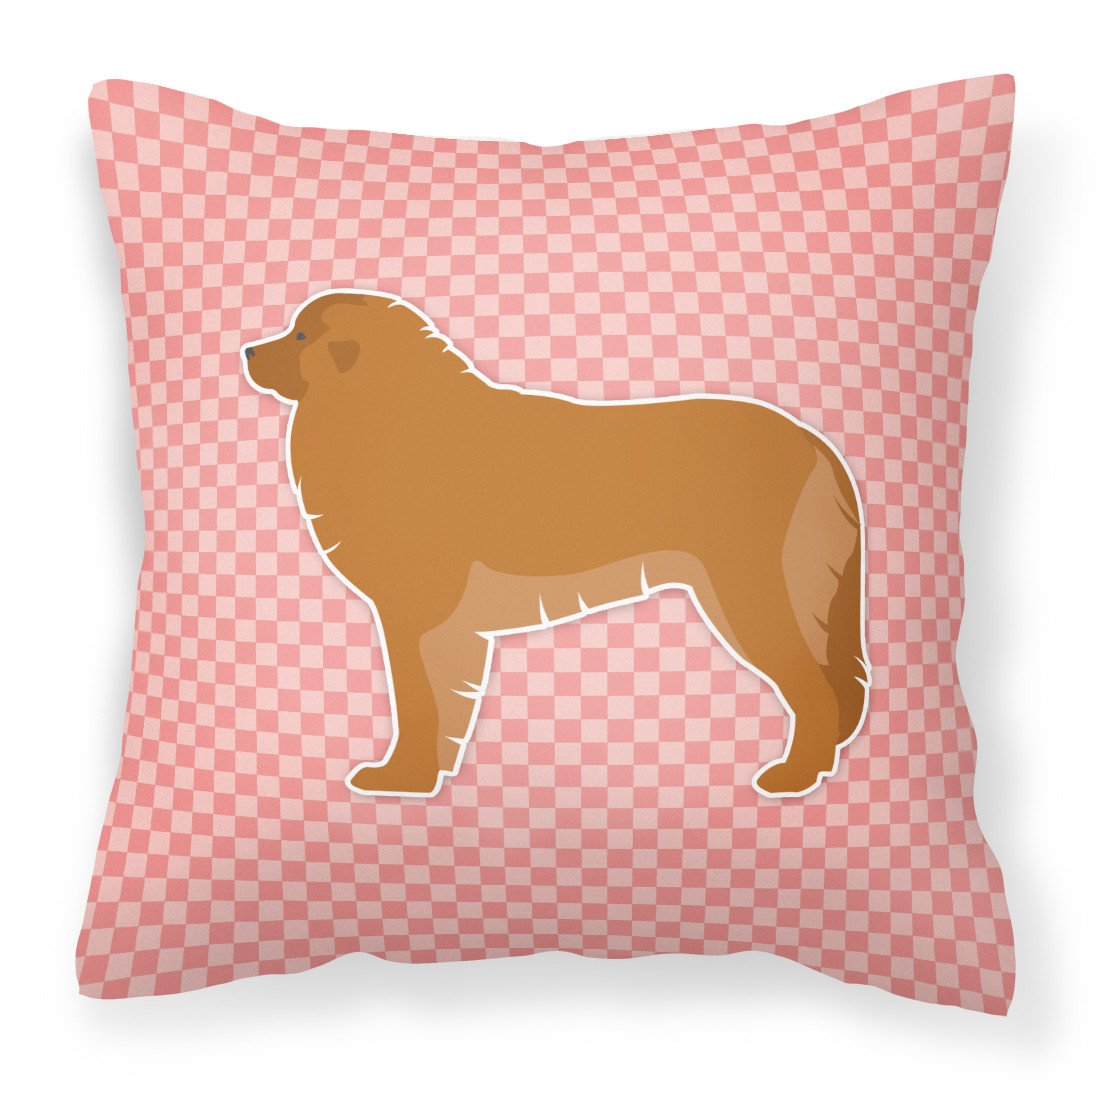 Leonberger Checkerboard Pink Fabric Decorative Pillow BB3658PW1818 by Caroline's Treasures